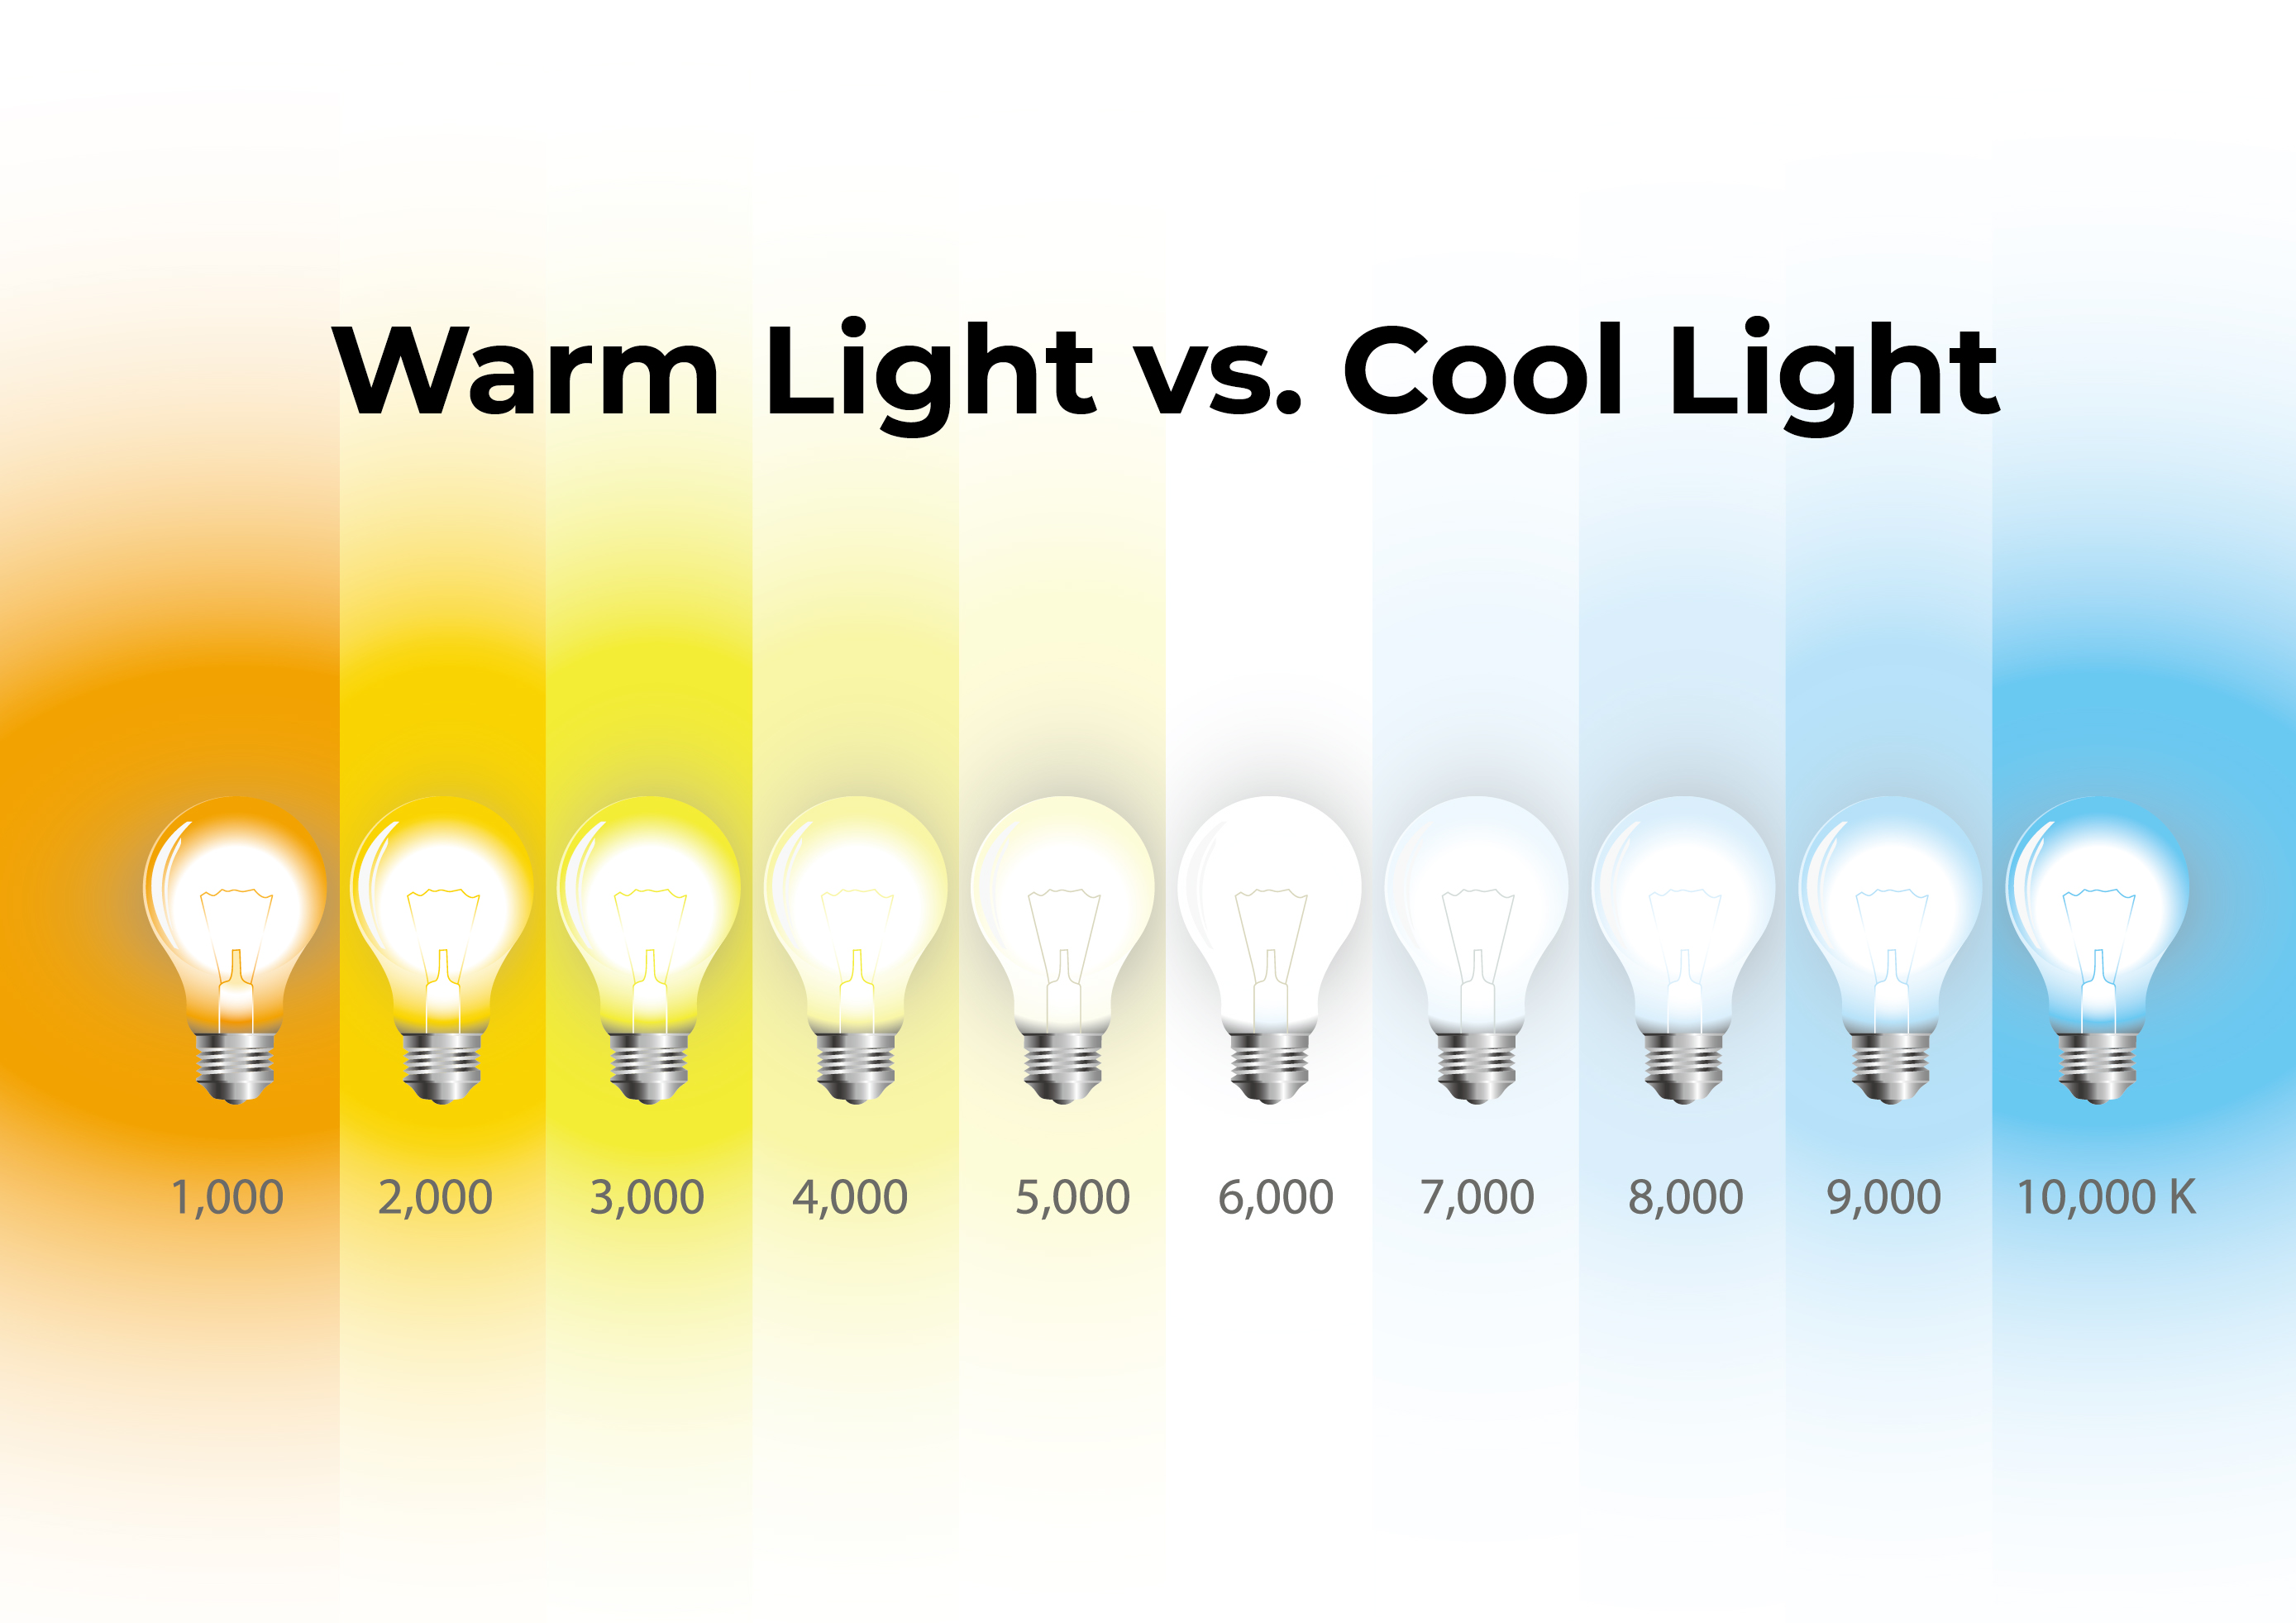 Warm Light vs. Cool Light: Which Is Better?